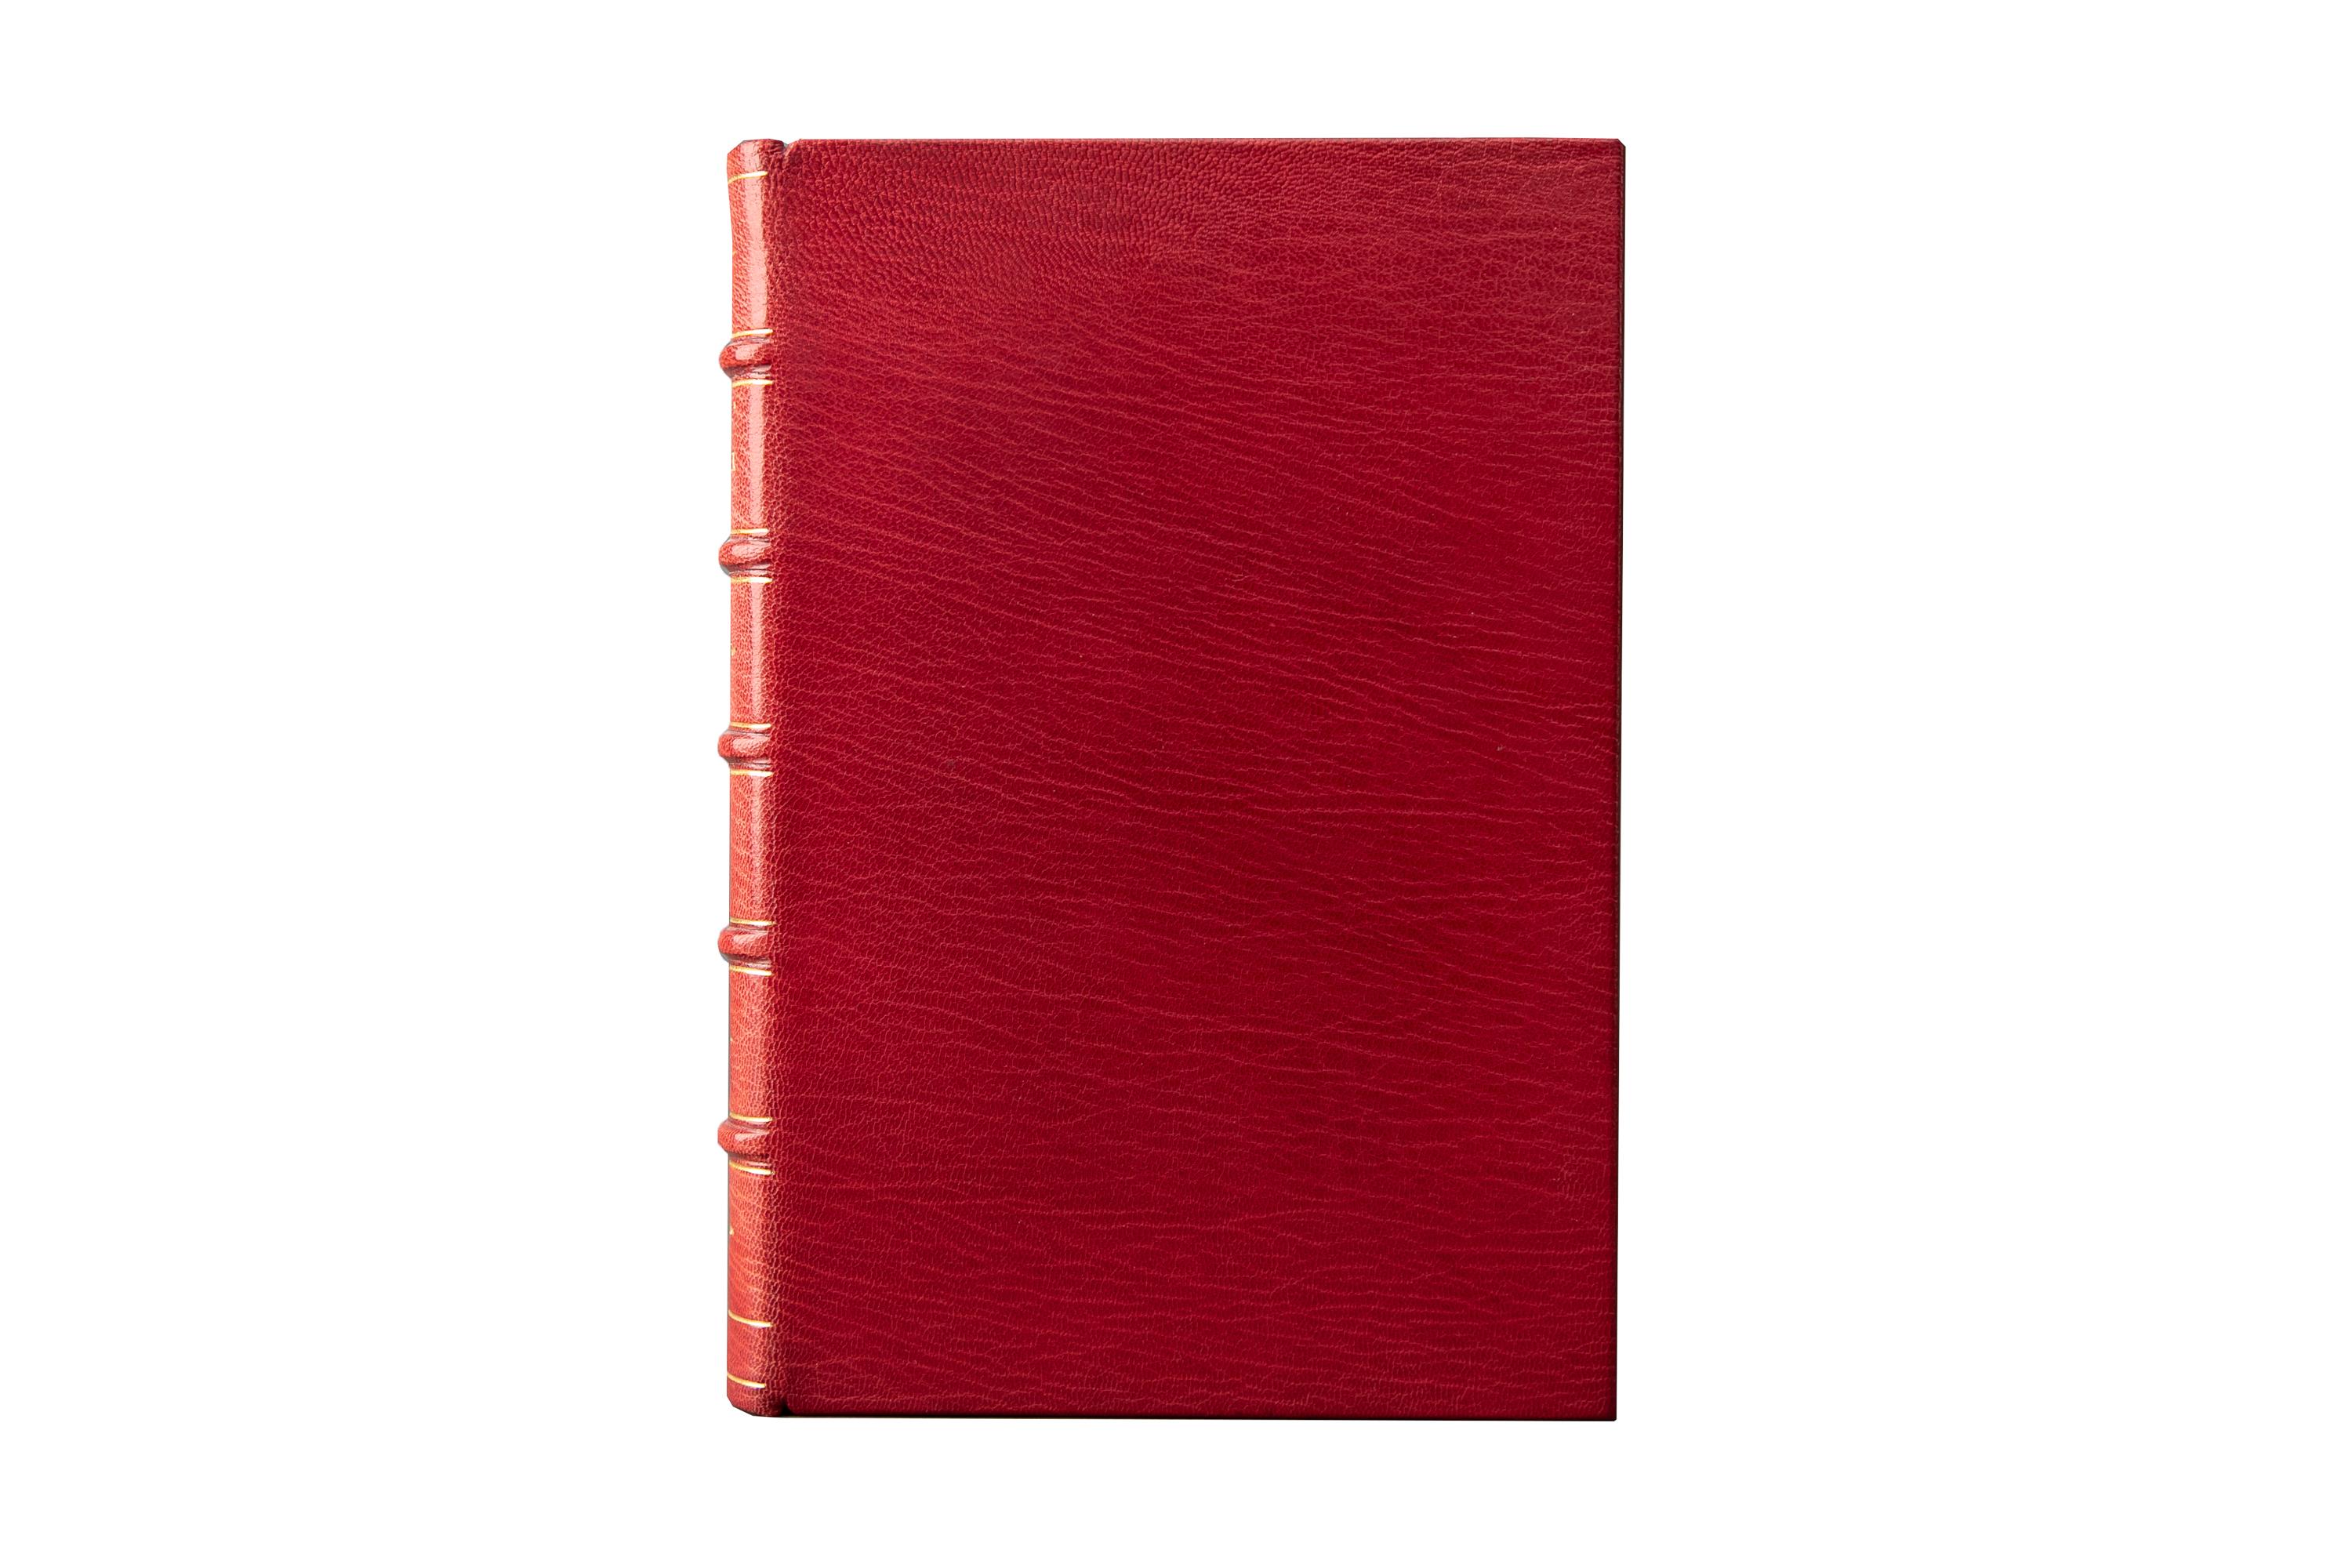 24 Volumes. Arthur Conan Doyle, The Works. The Crowborough Edition. Bound in full red morocco. The spines display raised bands and gilt-tooled panel details. The top edges are gilded with marbled endpapers. This first edition is limited to 760